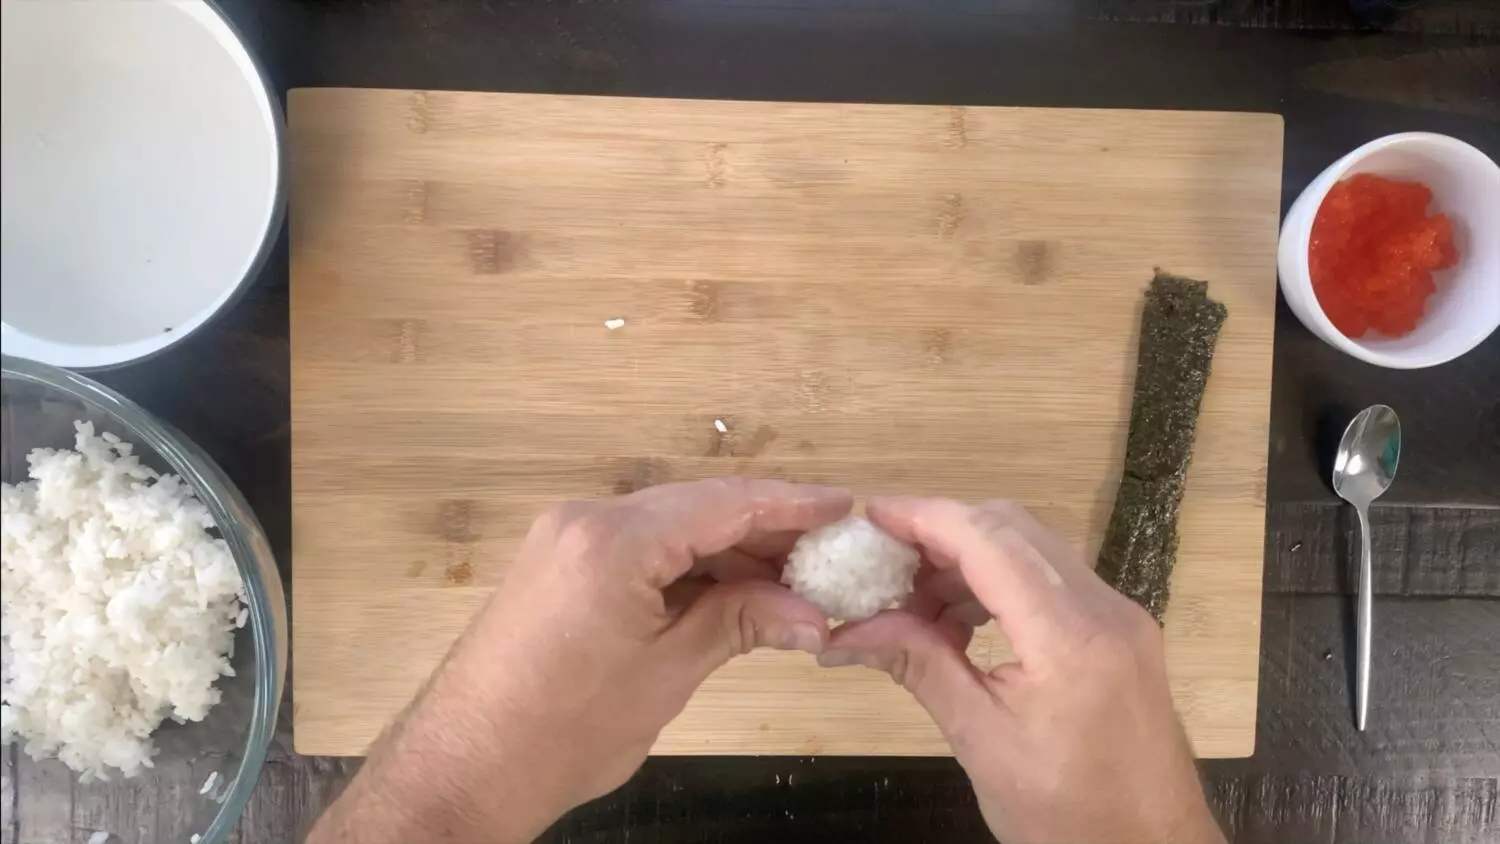 Forming the rice into oval-shaped balls for ikura sushi